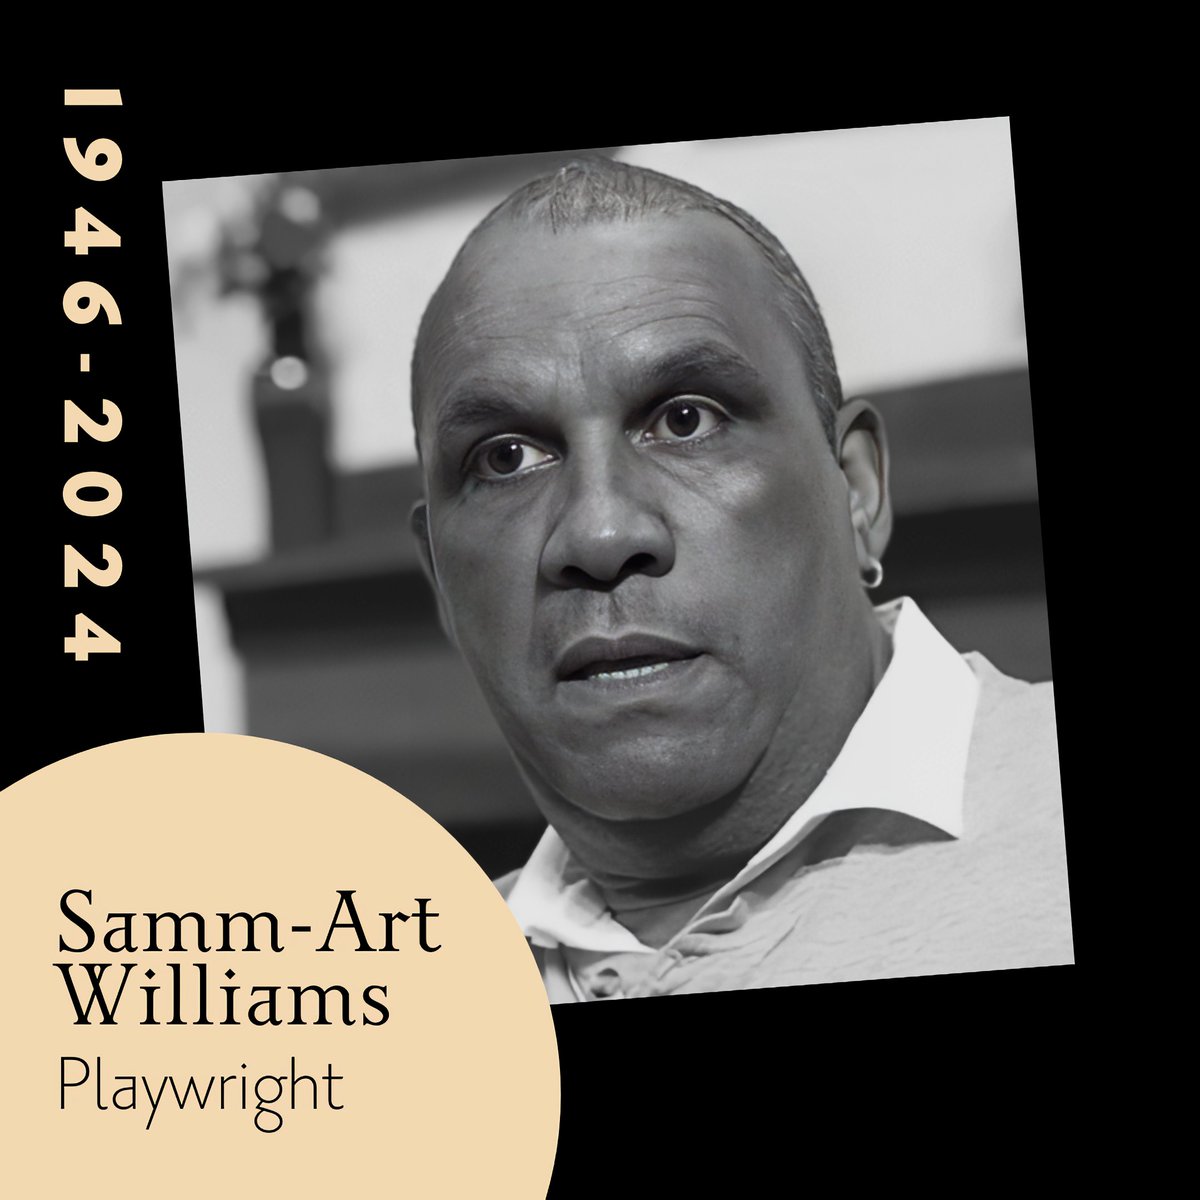 It is with great sadness that we share the passing of Samm-Art Williams, the esteemed actor, director, longtime Dramatists Guild member, and Tony-nominated playwright of 'Home.' Mr. Williams passed away peacefully on the morning of May 13 in Burgaw, North Carolina, at the age of